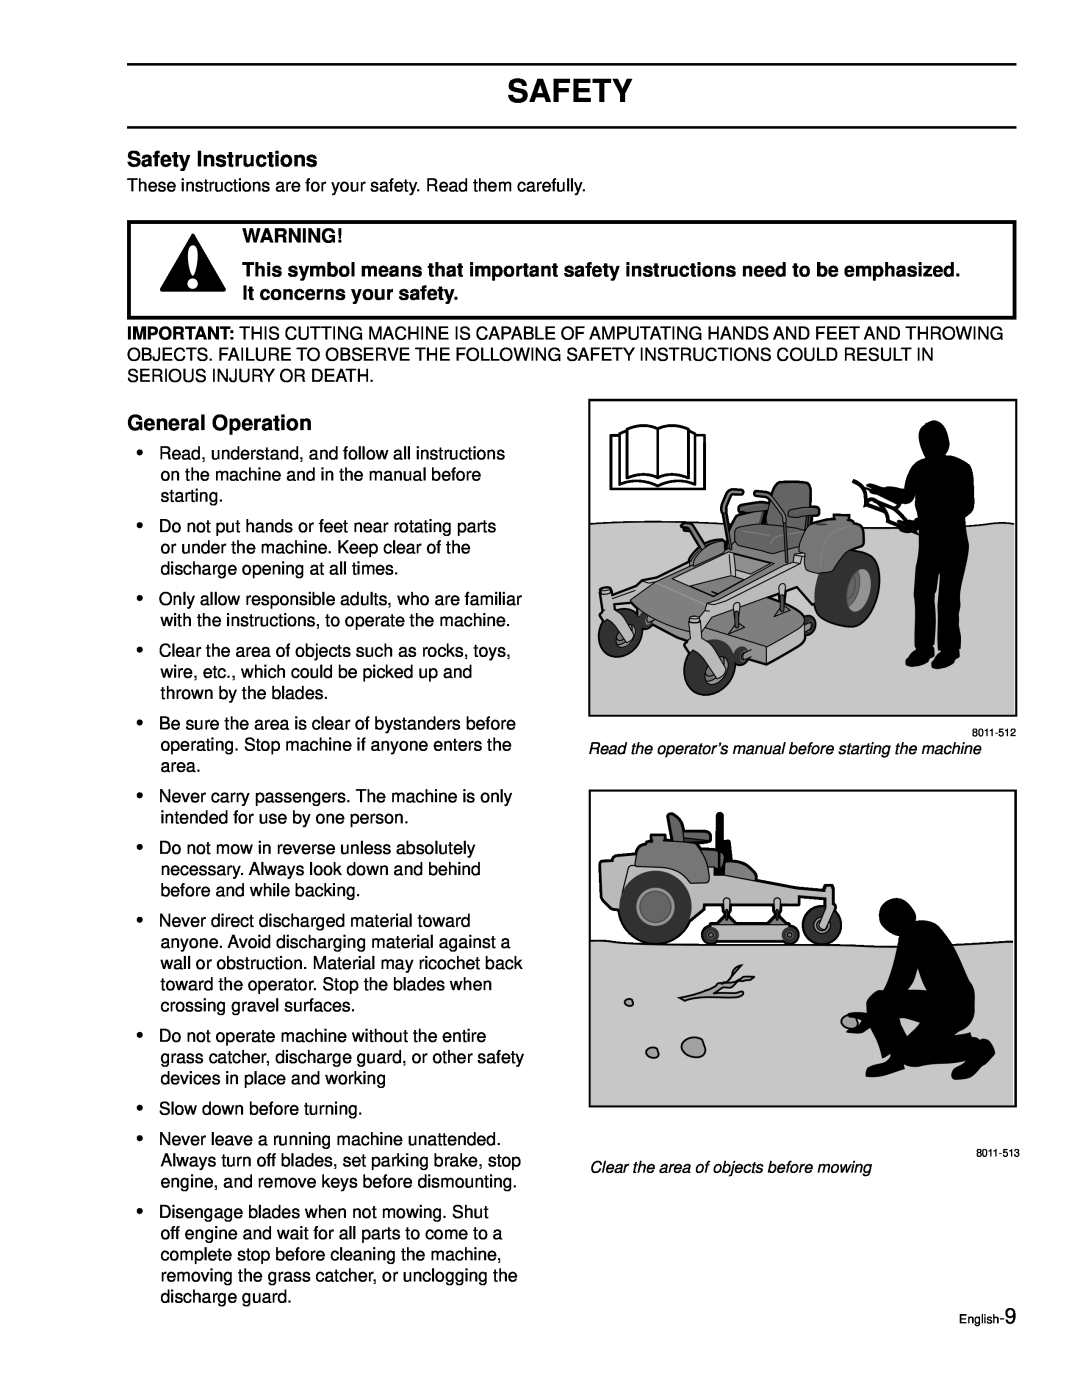 Husqvarna LZ6130C, LZ7230C, LZ7230, LZ6127, LZ5227, LZ6130, LZ30, LZ30C manual Safety Instructions, General Operation 